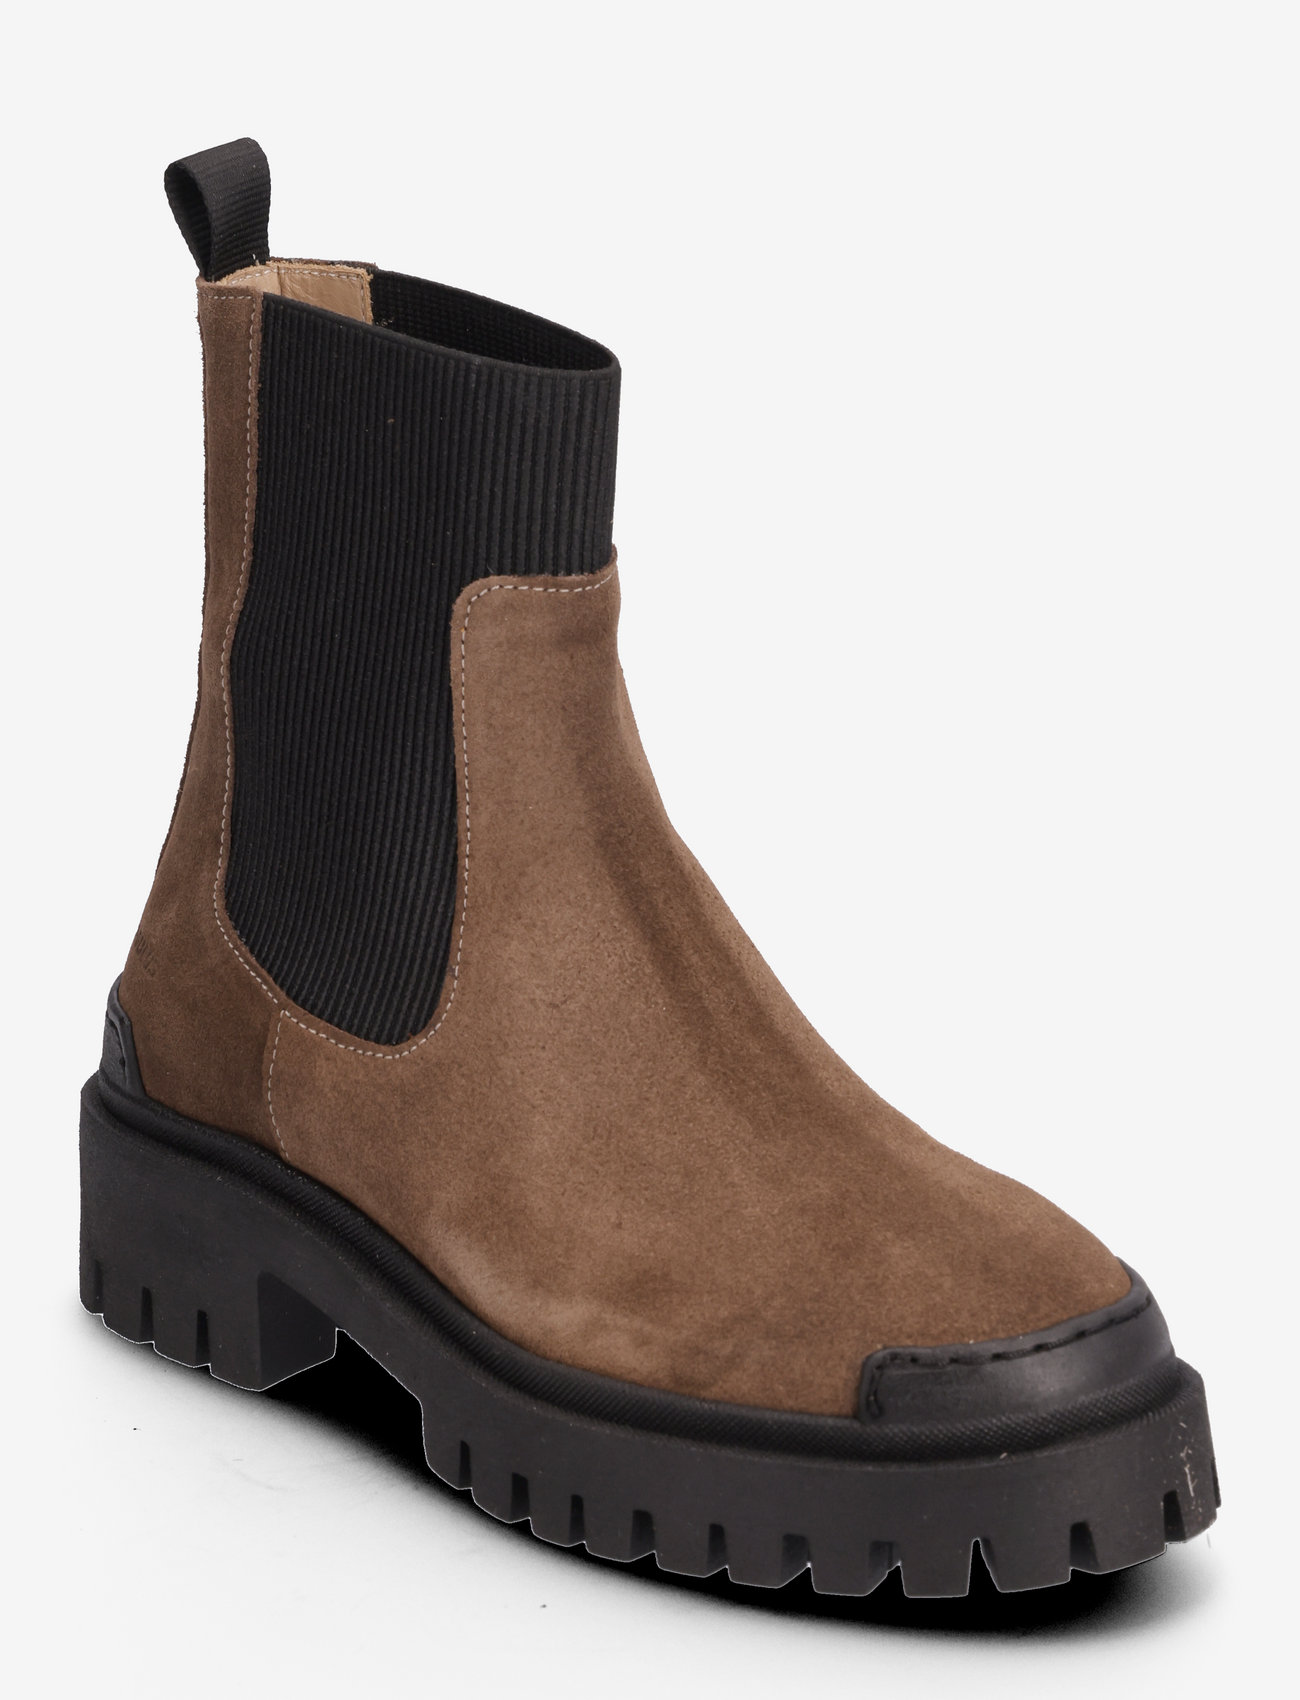 ANGULUS - Boots - flat - chelsea boots - 1753/019 taupe/black - 0